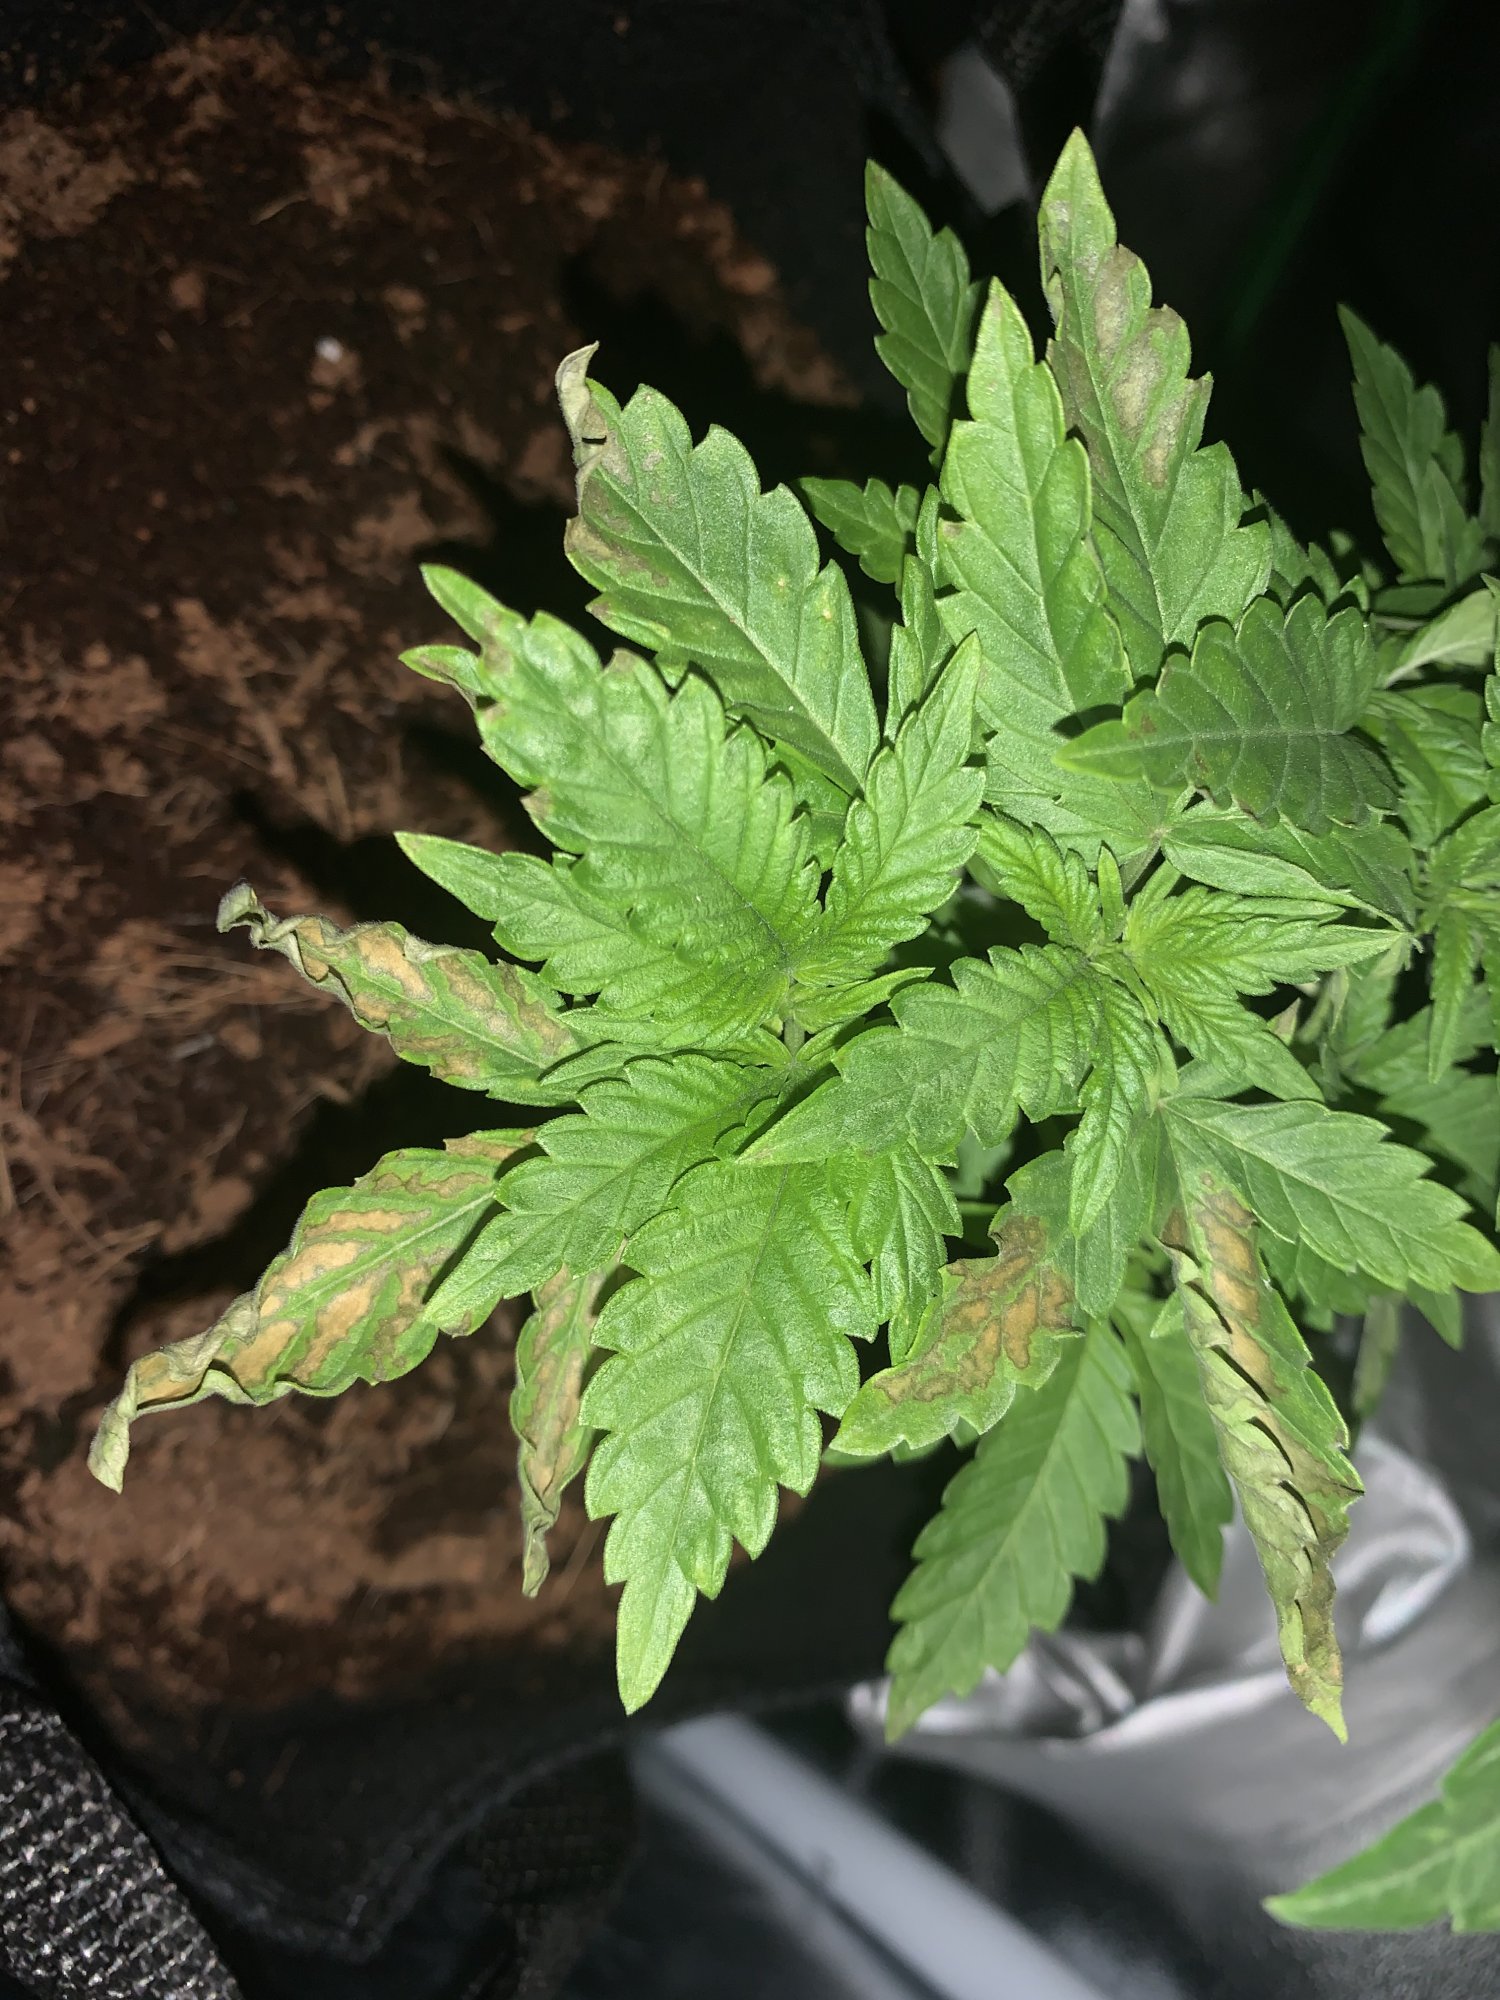 Issue with 1 out of my 6 plants